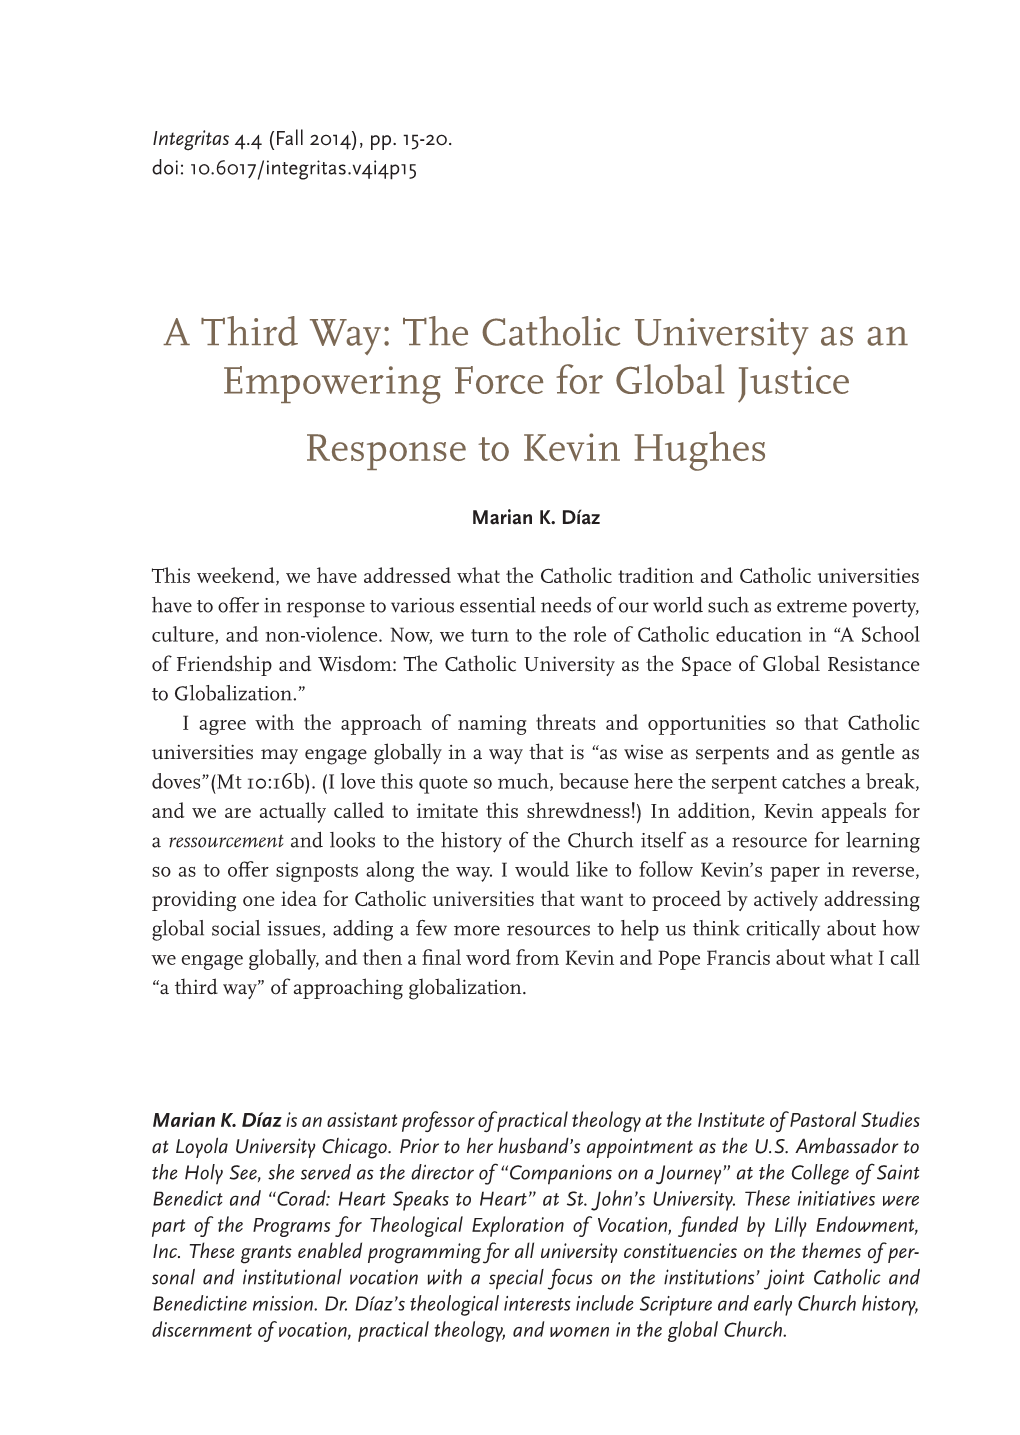 A Third Way: the Catholic University As an Empowering Force for Global Justice Response to Kevin Hughes